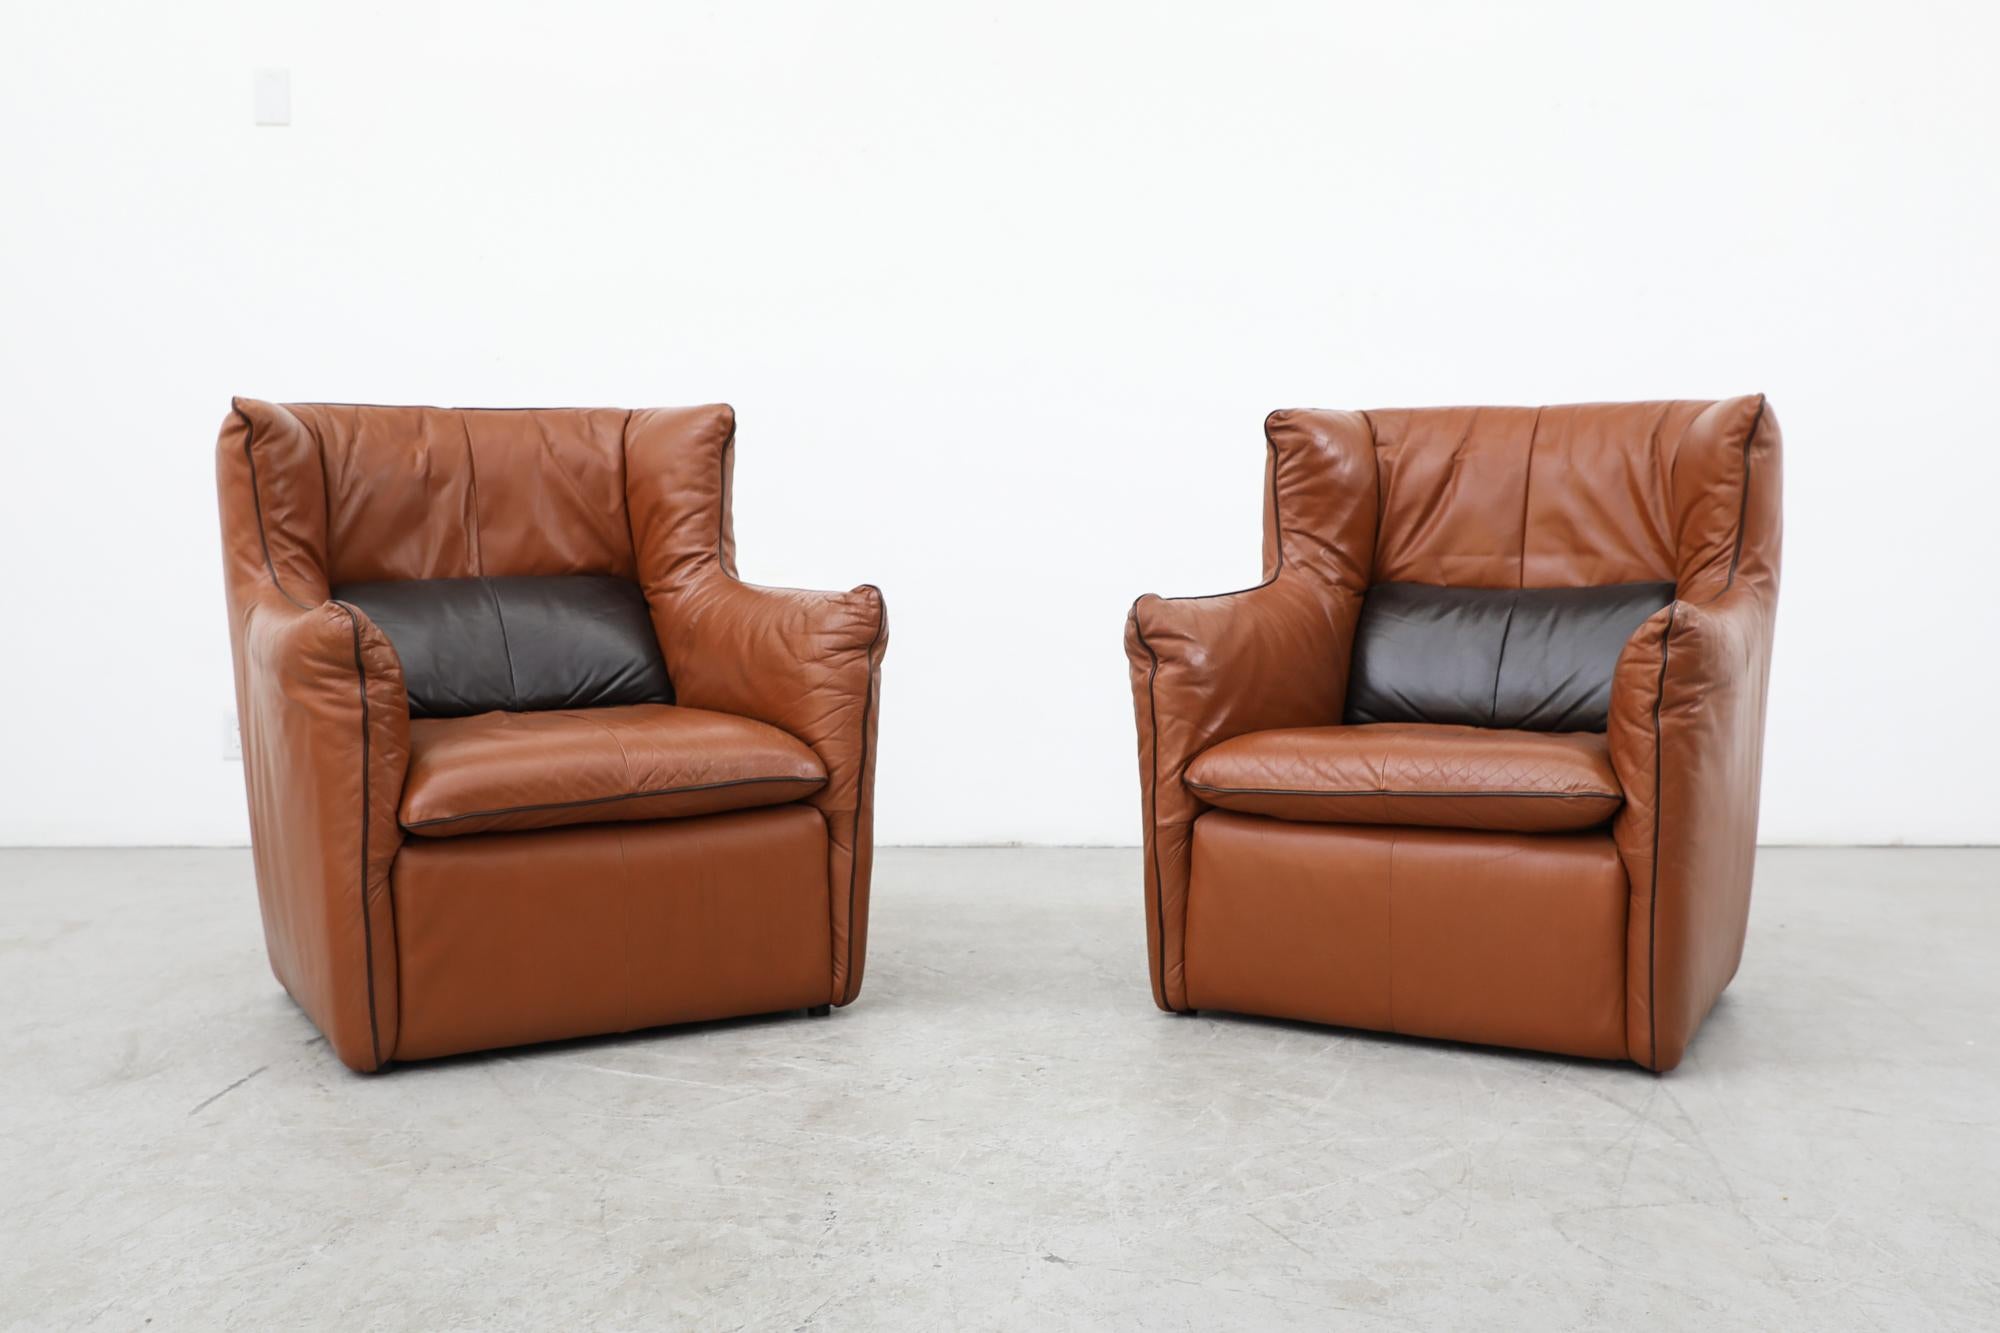 Pair of gerard van den Berg high back cognac leather lounge chairs with dark chocolate leather piping and buttoned on back pillows. Lovely patina to both lounge chairs. In original condition with wear consistent with their age and use. Set price.
 